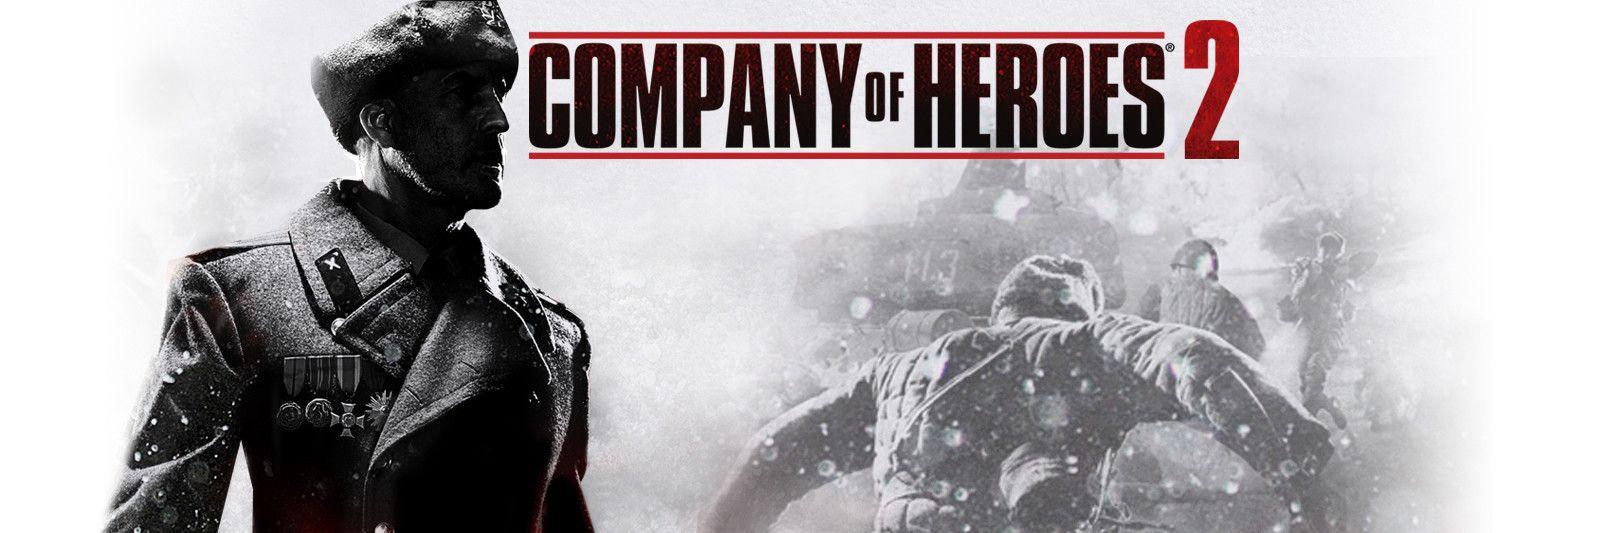 Company of Heroes 2 wallpaper 12